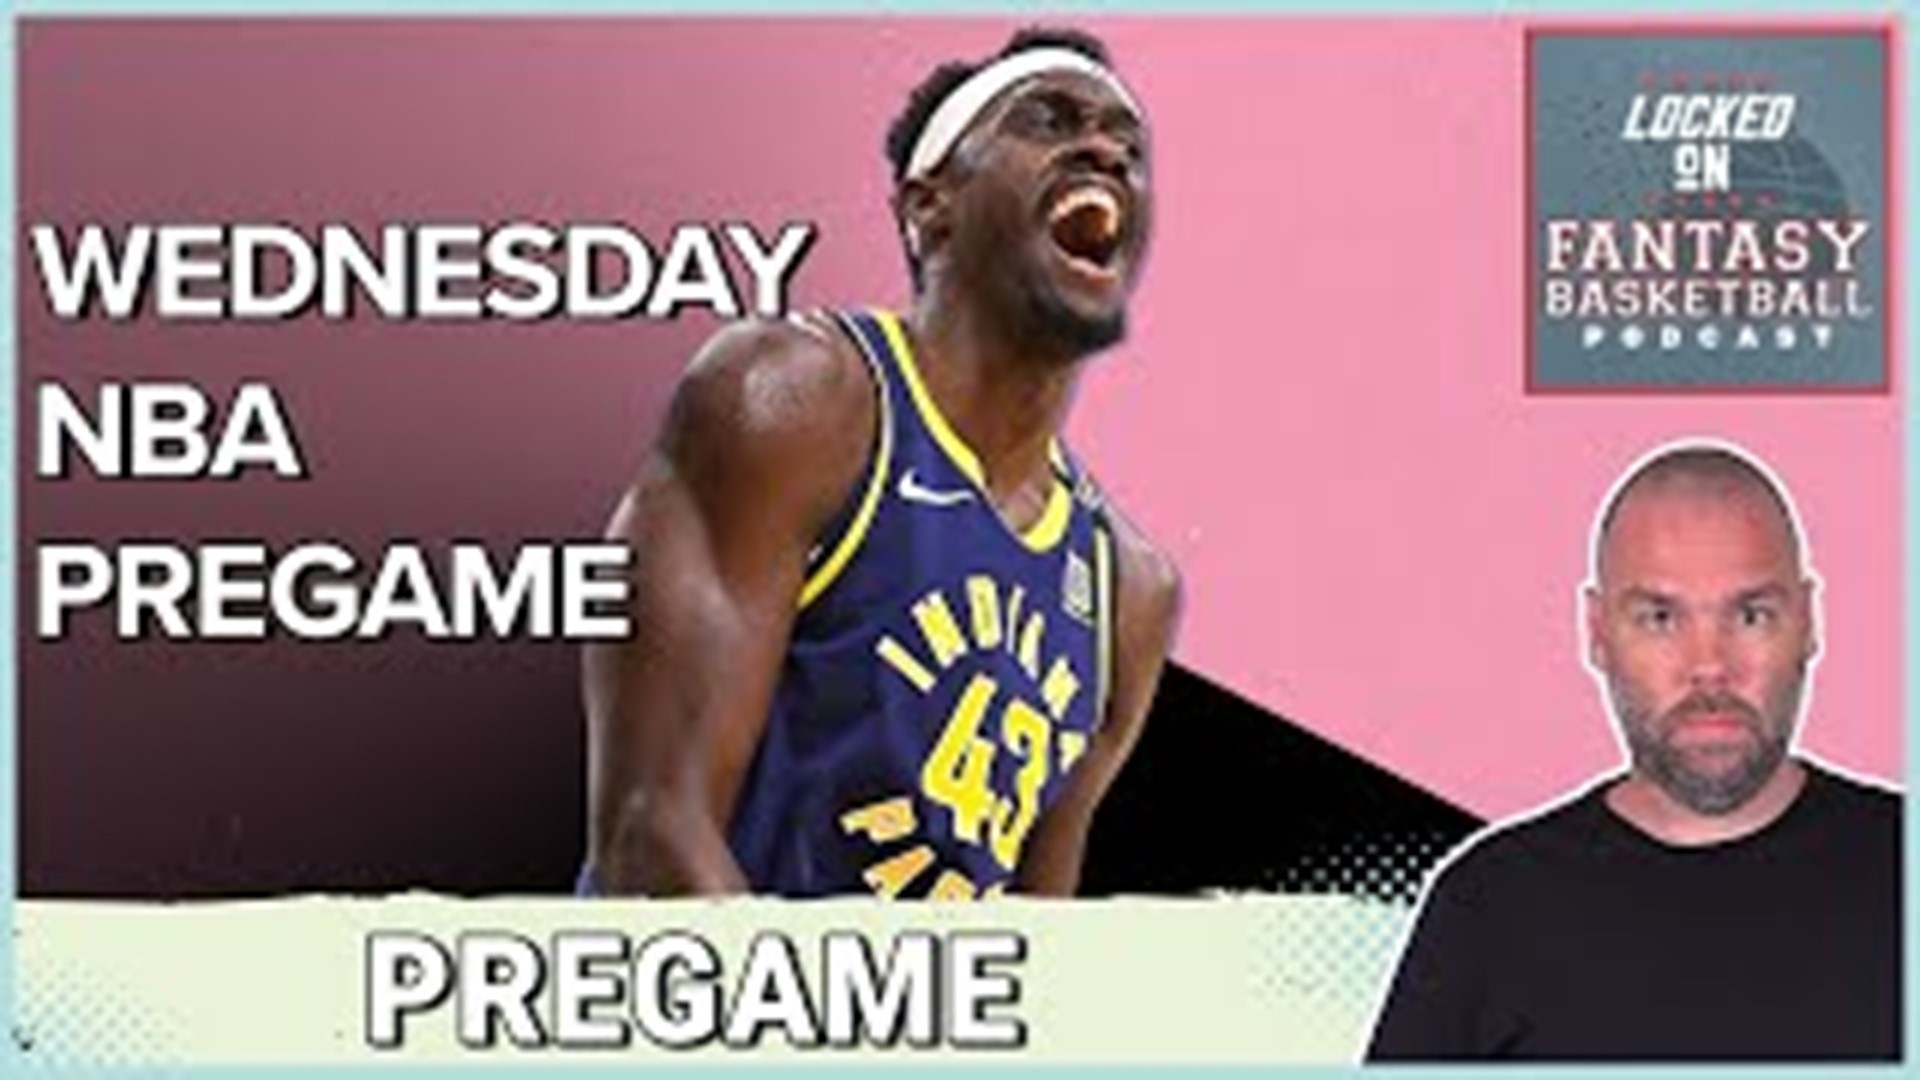 Welcome to the live NBA pregame show, hosted by Josh Lloyd, a leading voice in fantasy basketball analysis. We have 9 games scheduled for Wednesday.